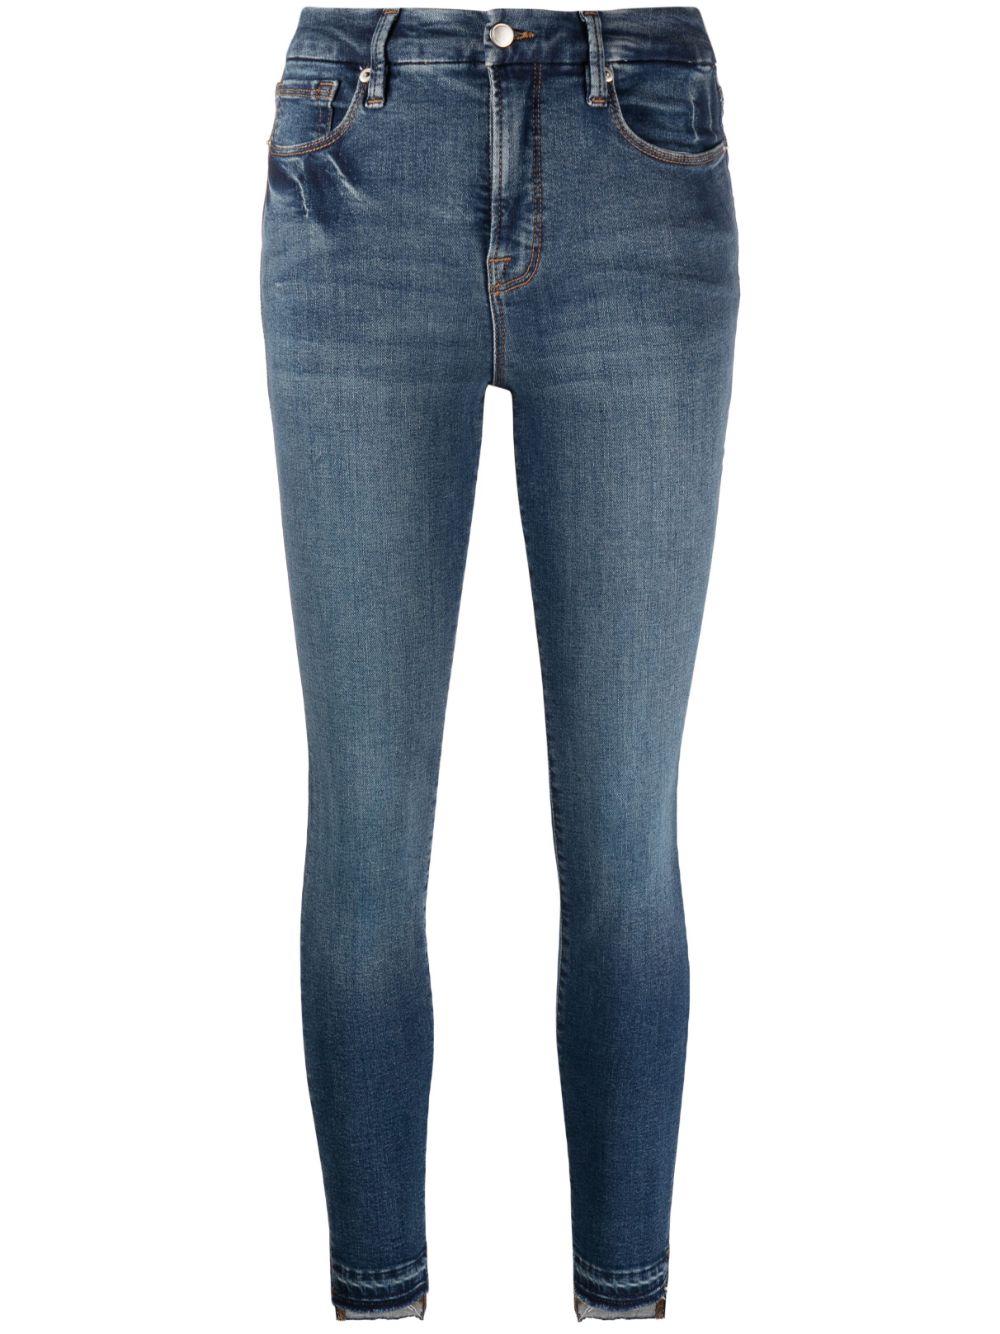 Image 1 of Good American Good Legs high-rise skinny jeans